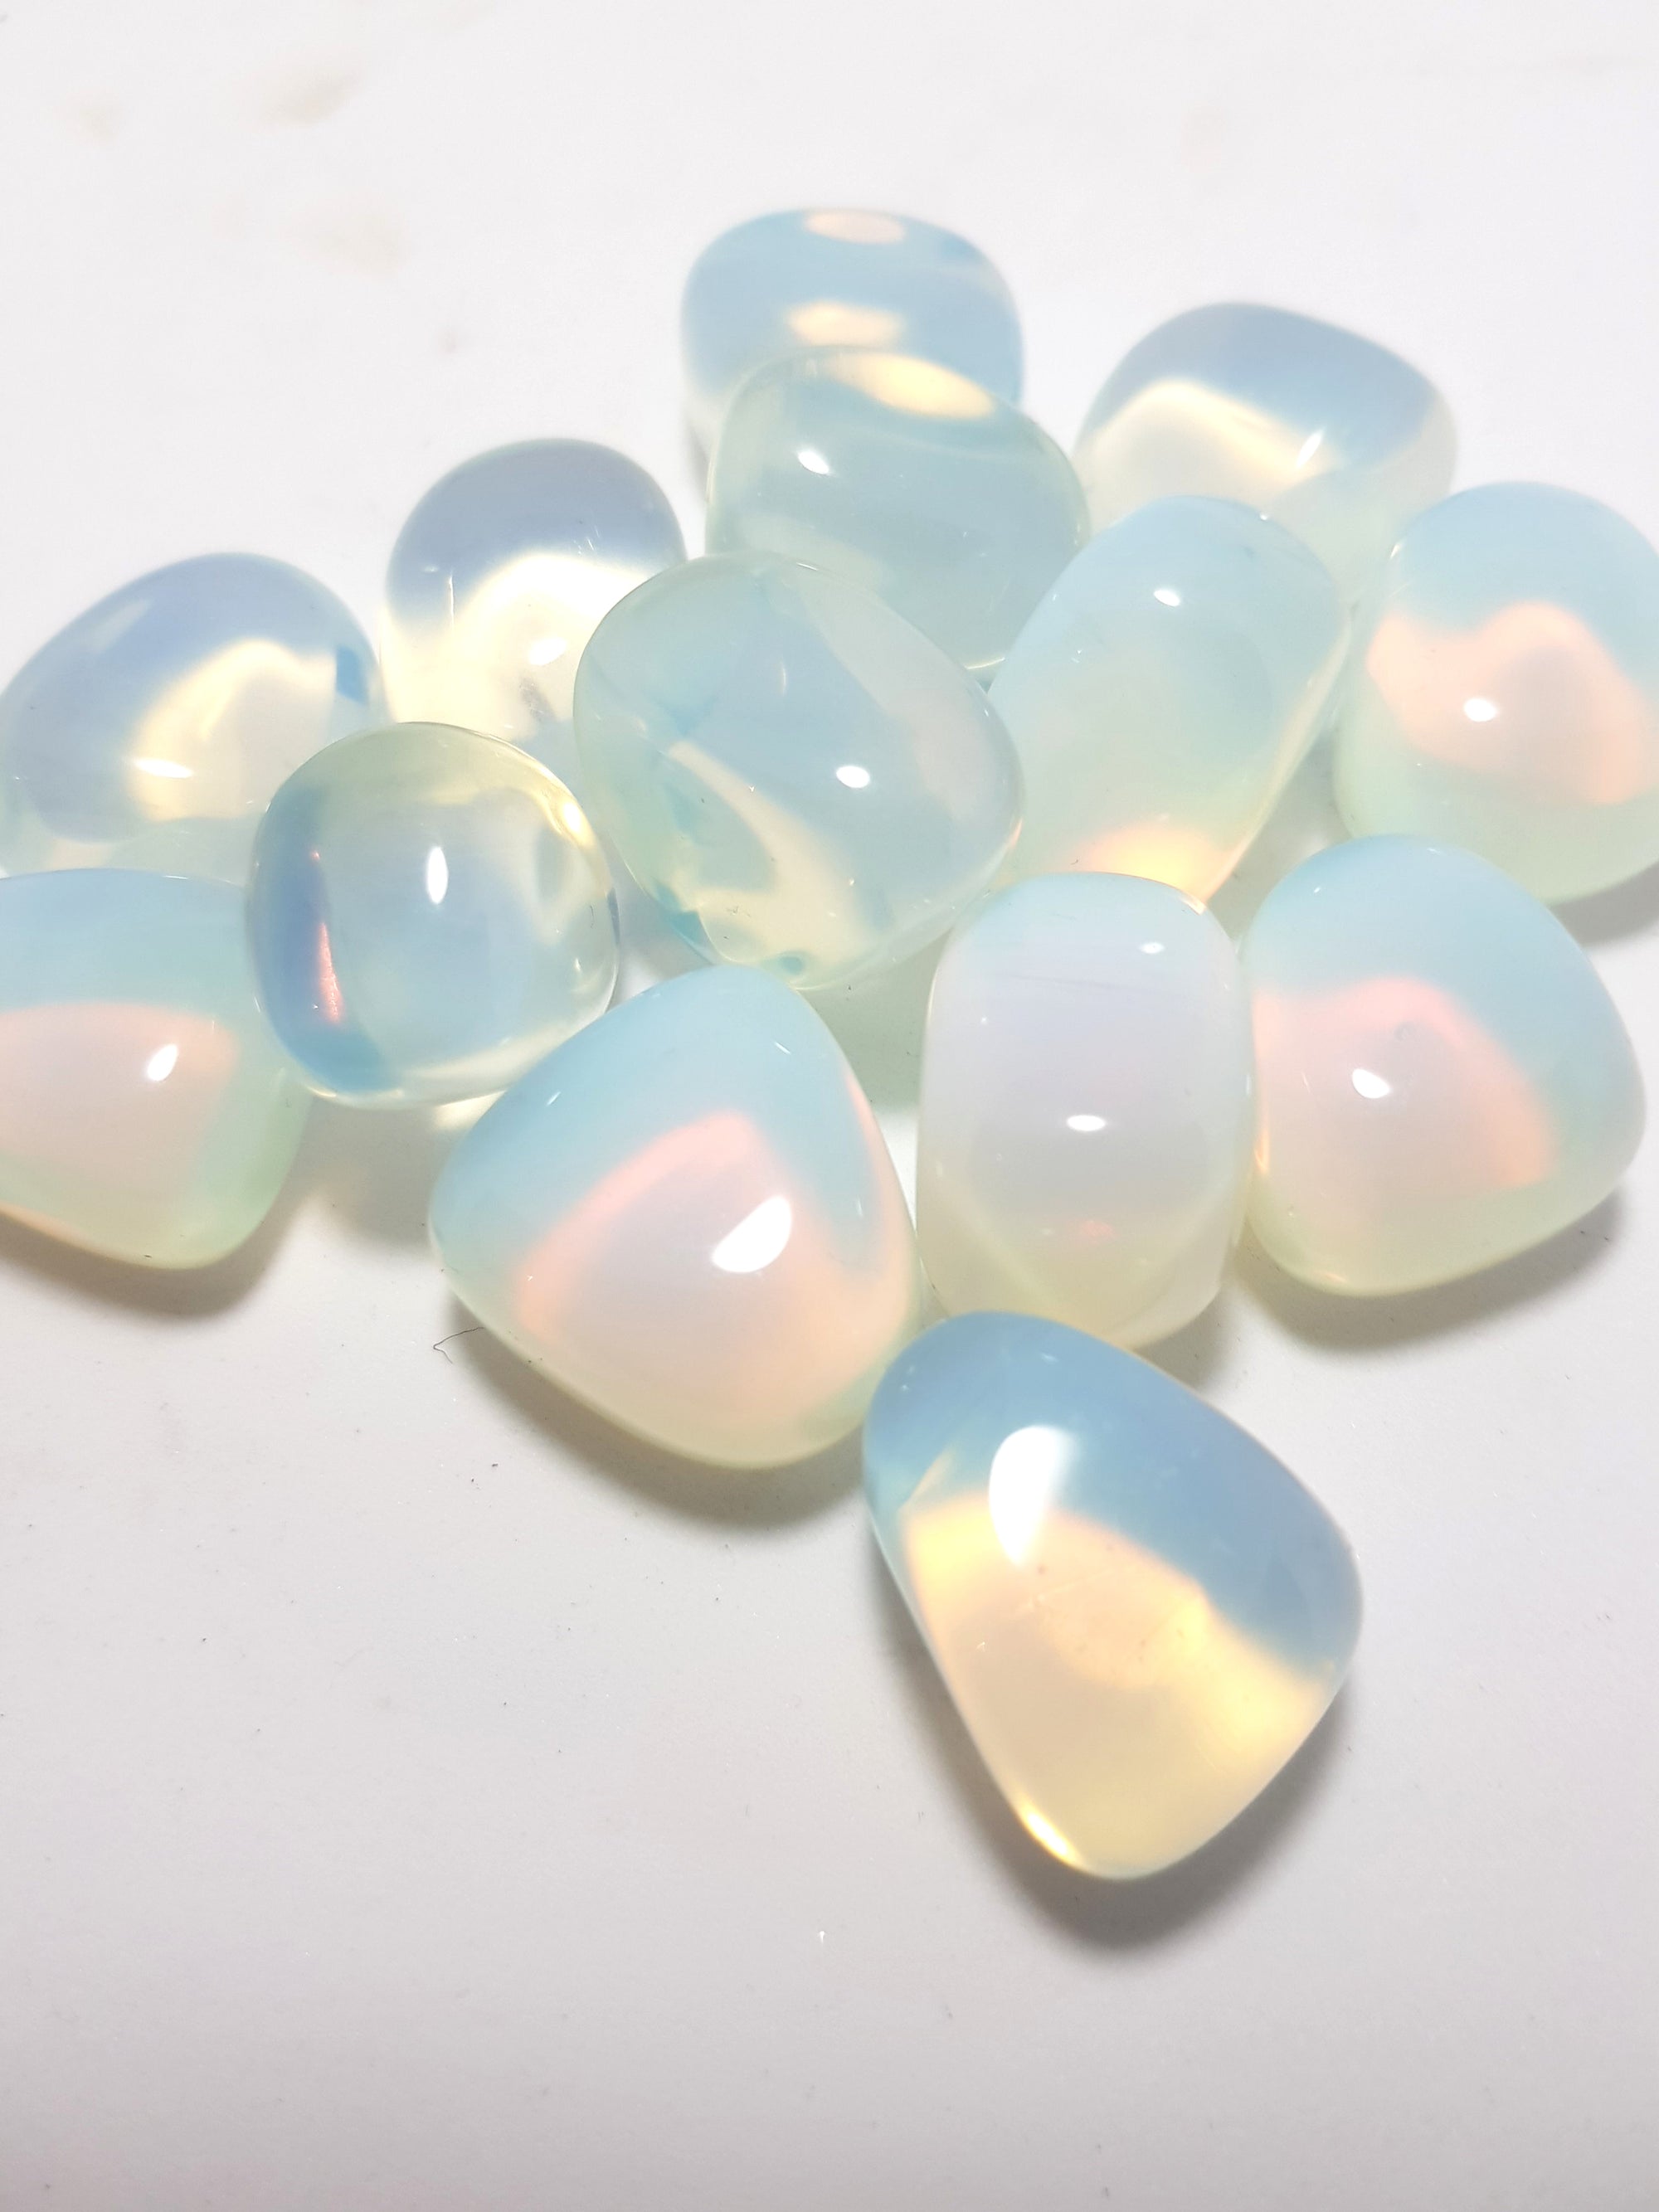 opalite tumbles with a glow of pink and blue